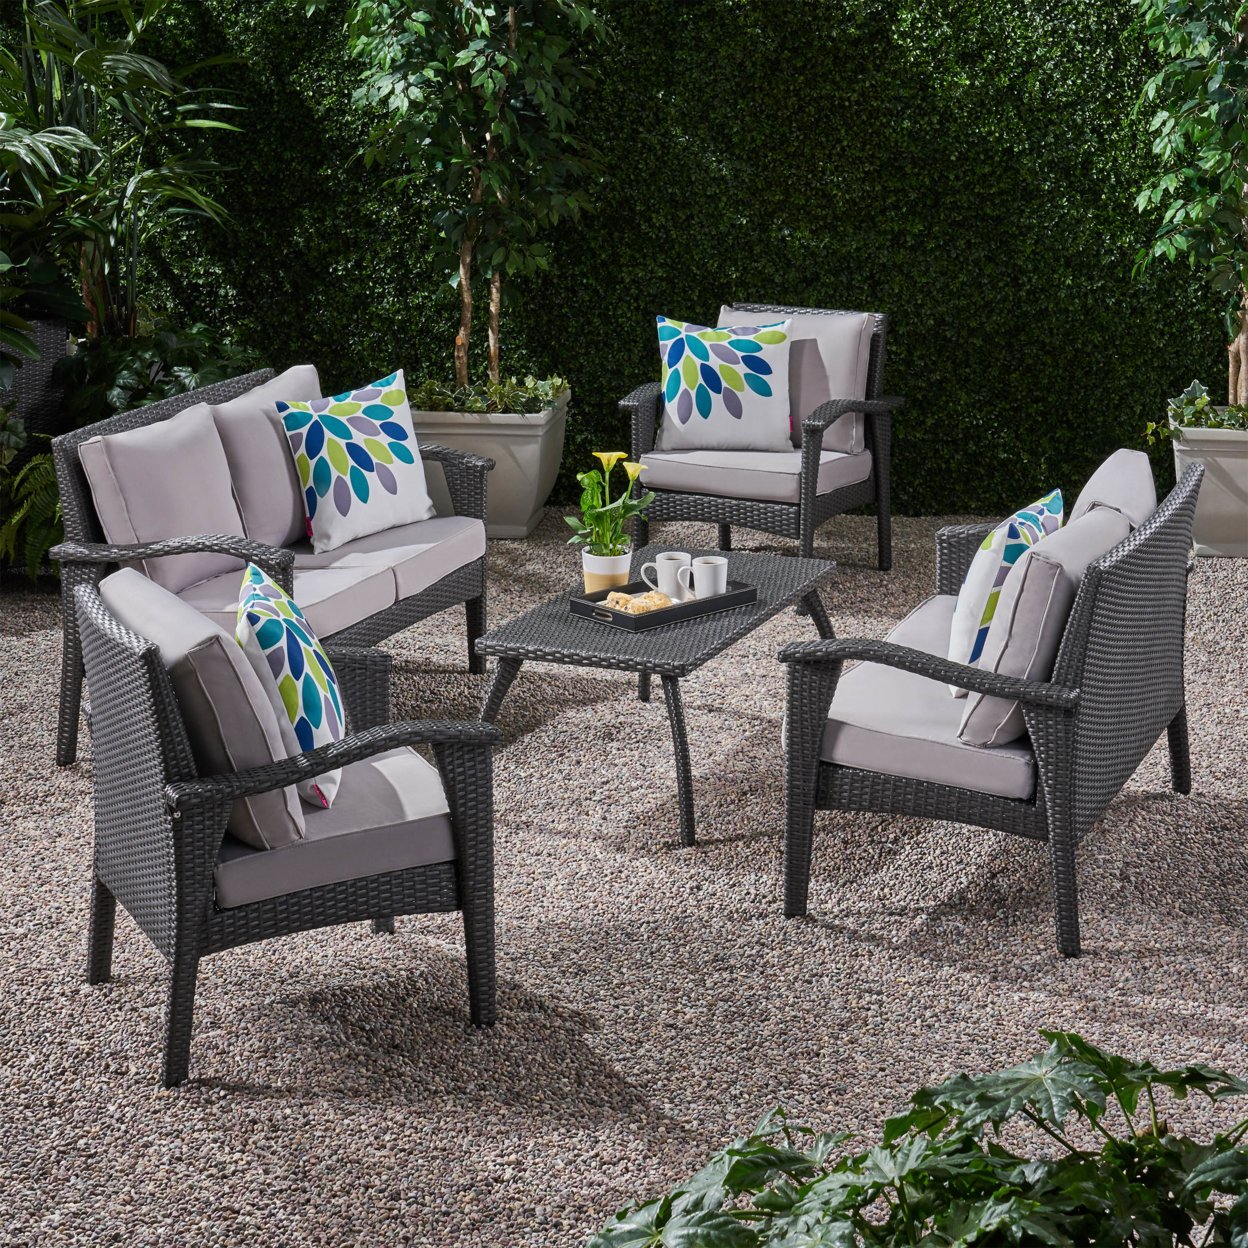 Belle Outdoor 6 Seater Wicker Chat Set With Cushions - Gray + Light Gray